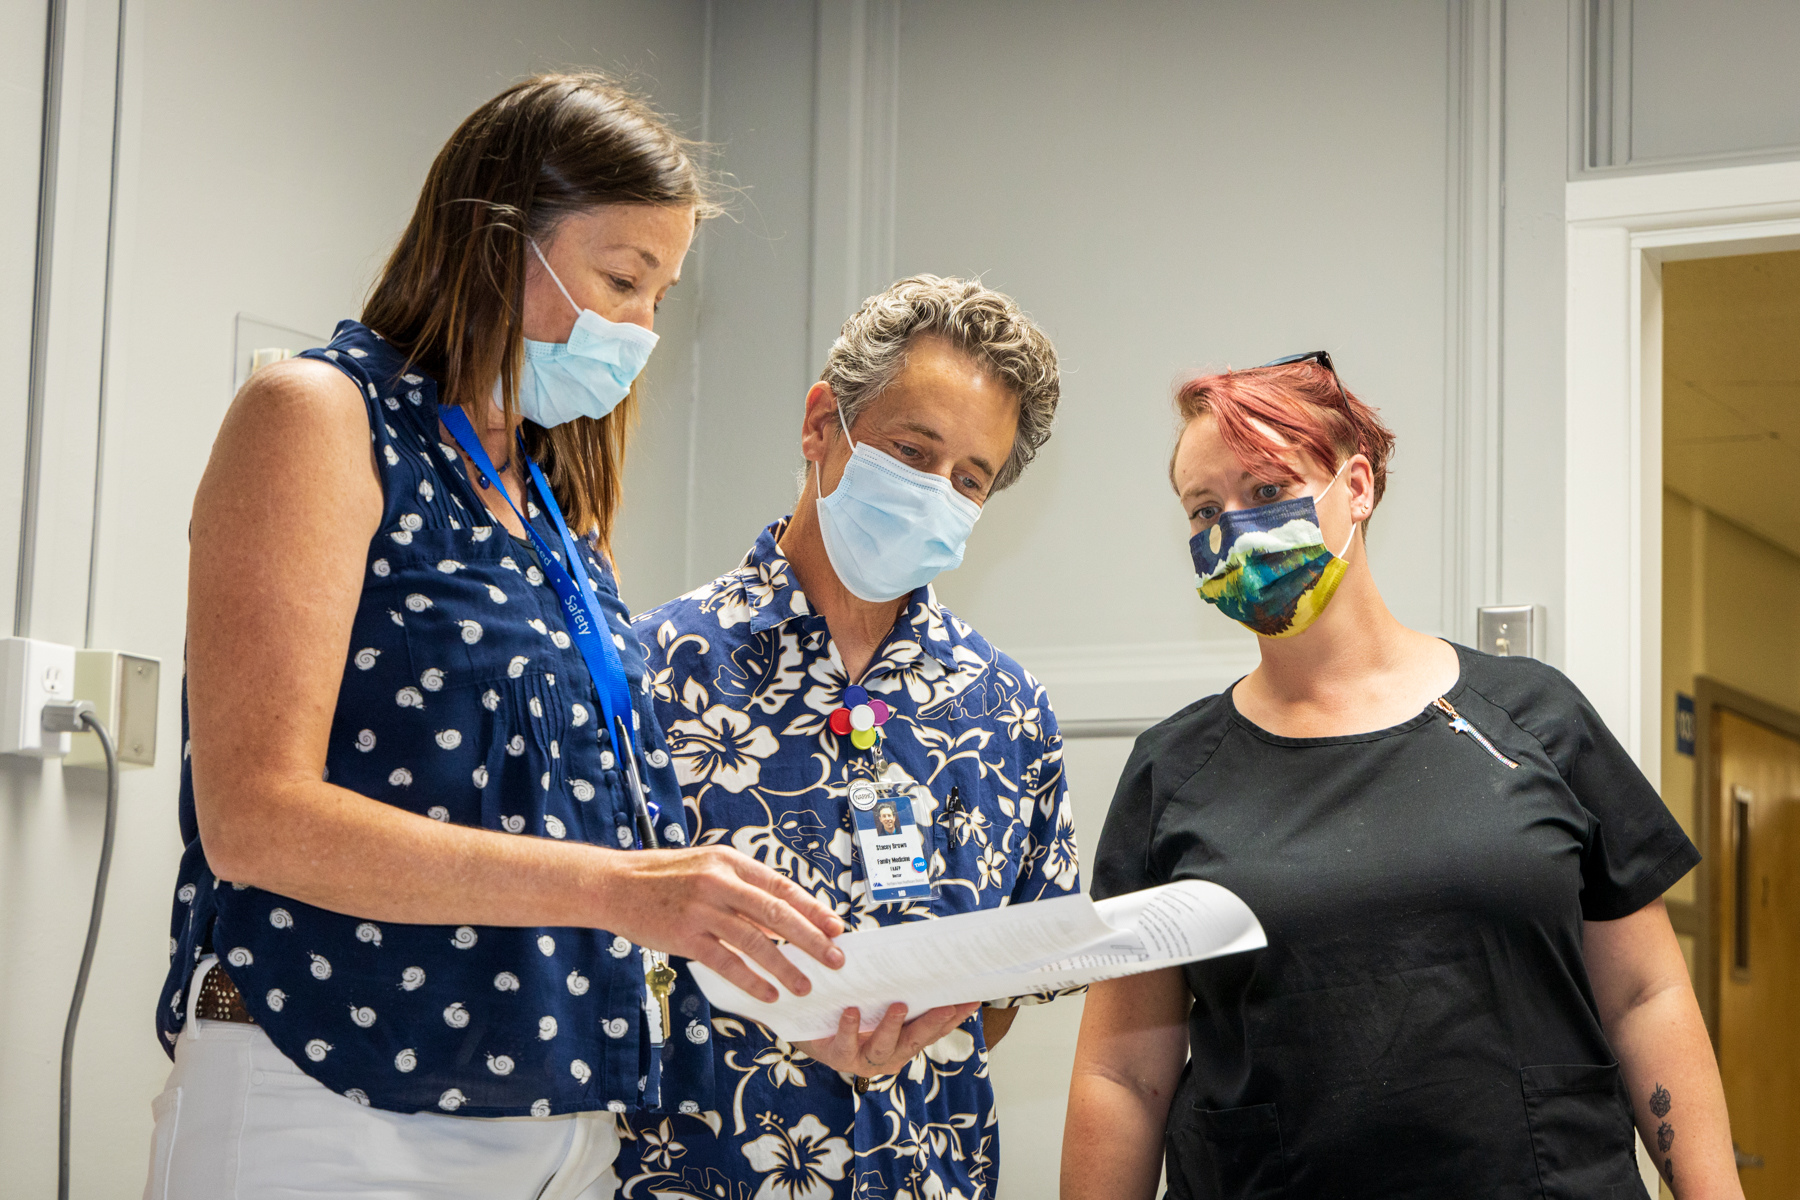 Nurse Practitioner Colleen McEvoy, Dr. Stacey Brown, and Medical Assistant Kaylyn Rickford review the day's schedule. Photo by Scot Swan